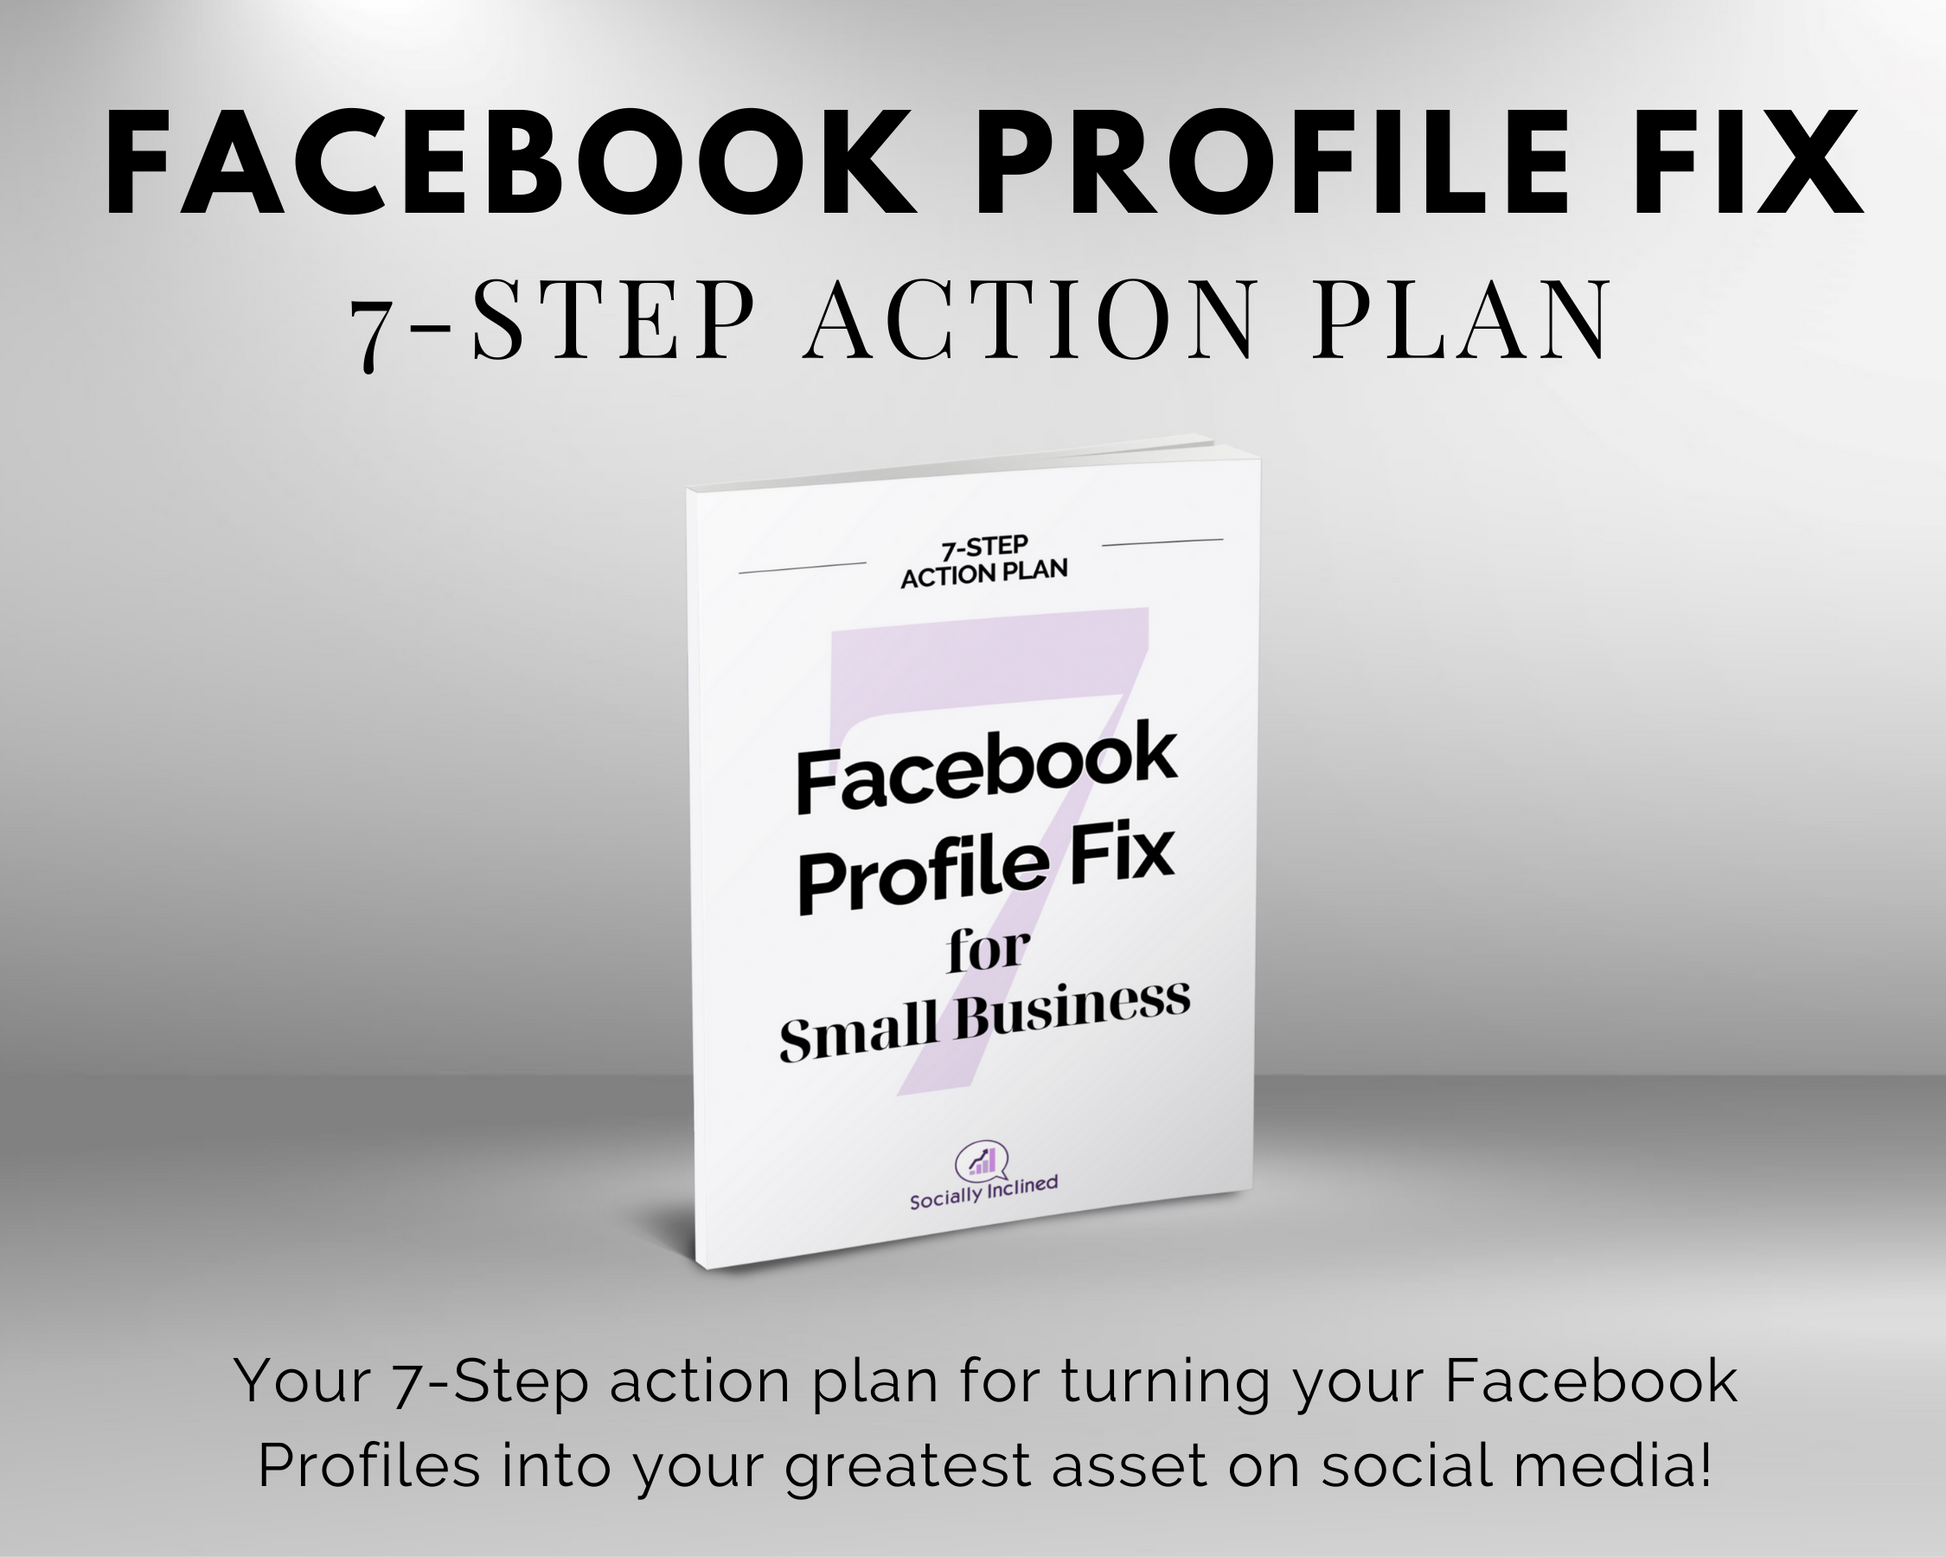 Optimize your Facebook profile with Get Socially Inclined's Facebook Profile Fix 7-Day Action Plan for a complete Facebook profile fix.